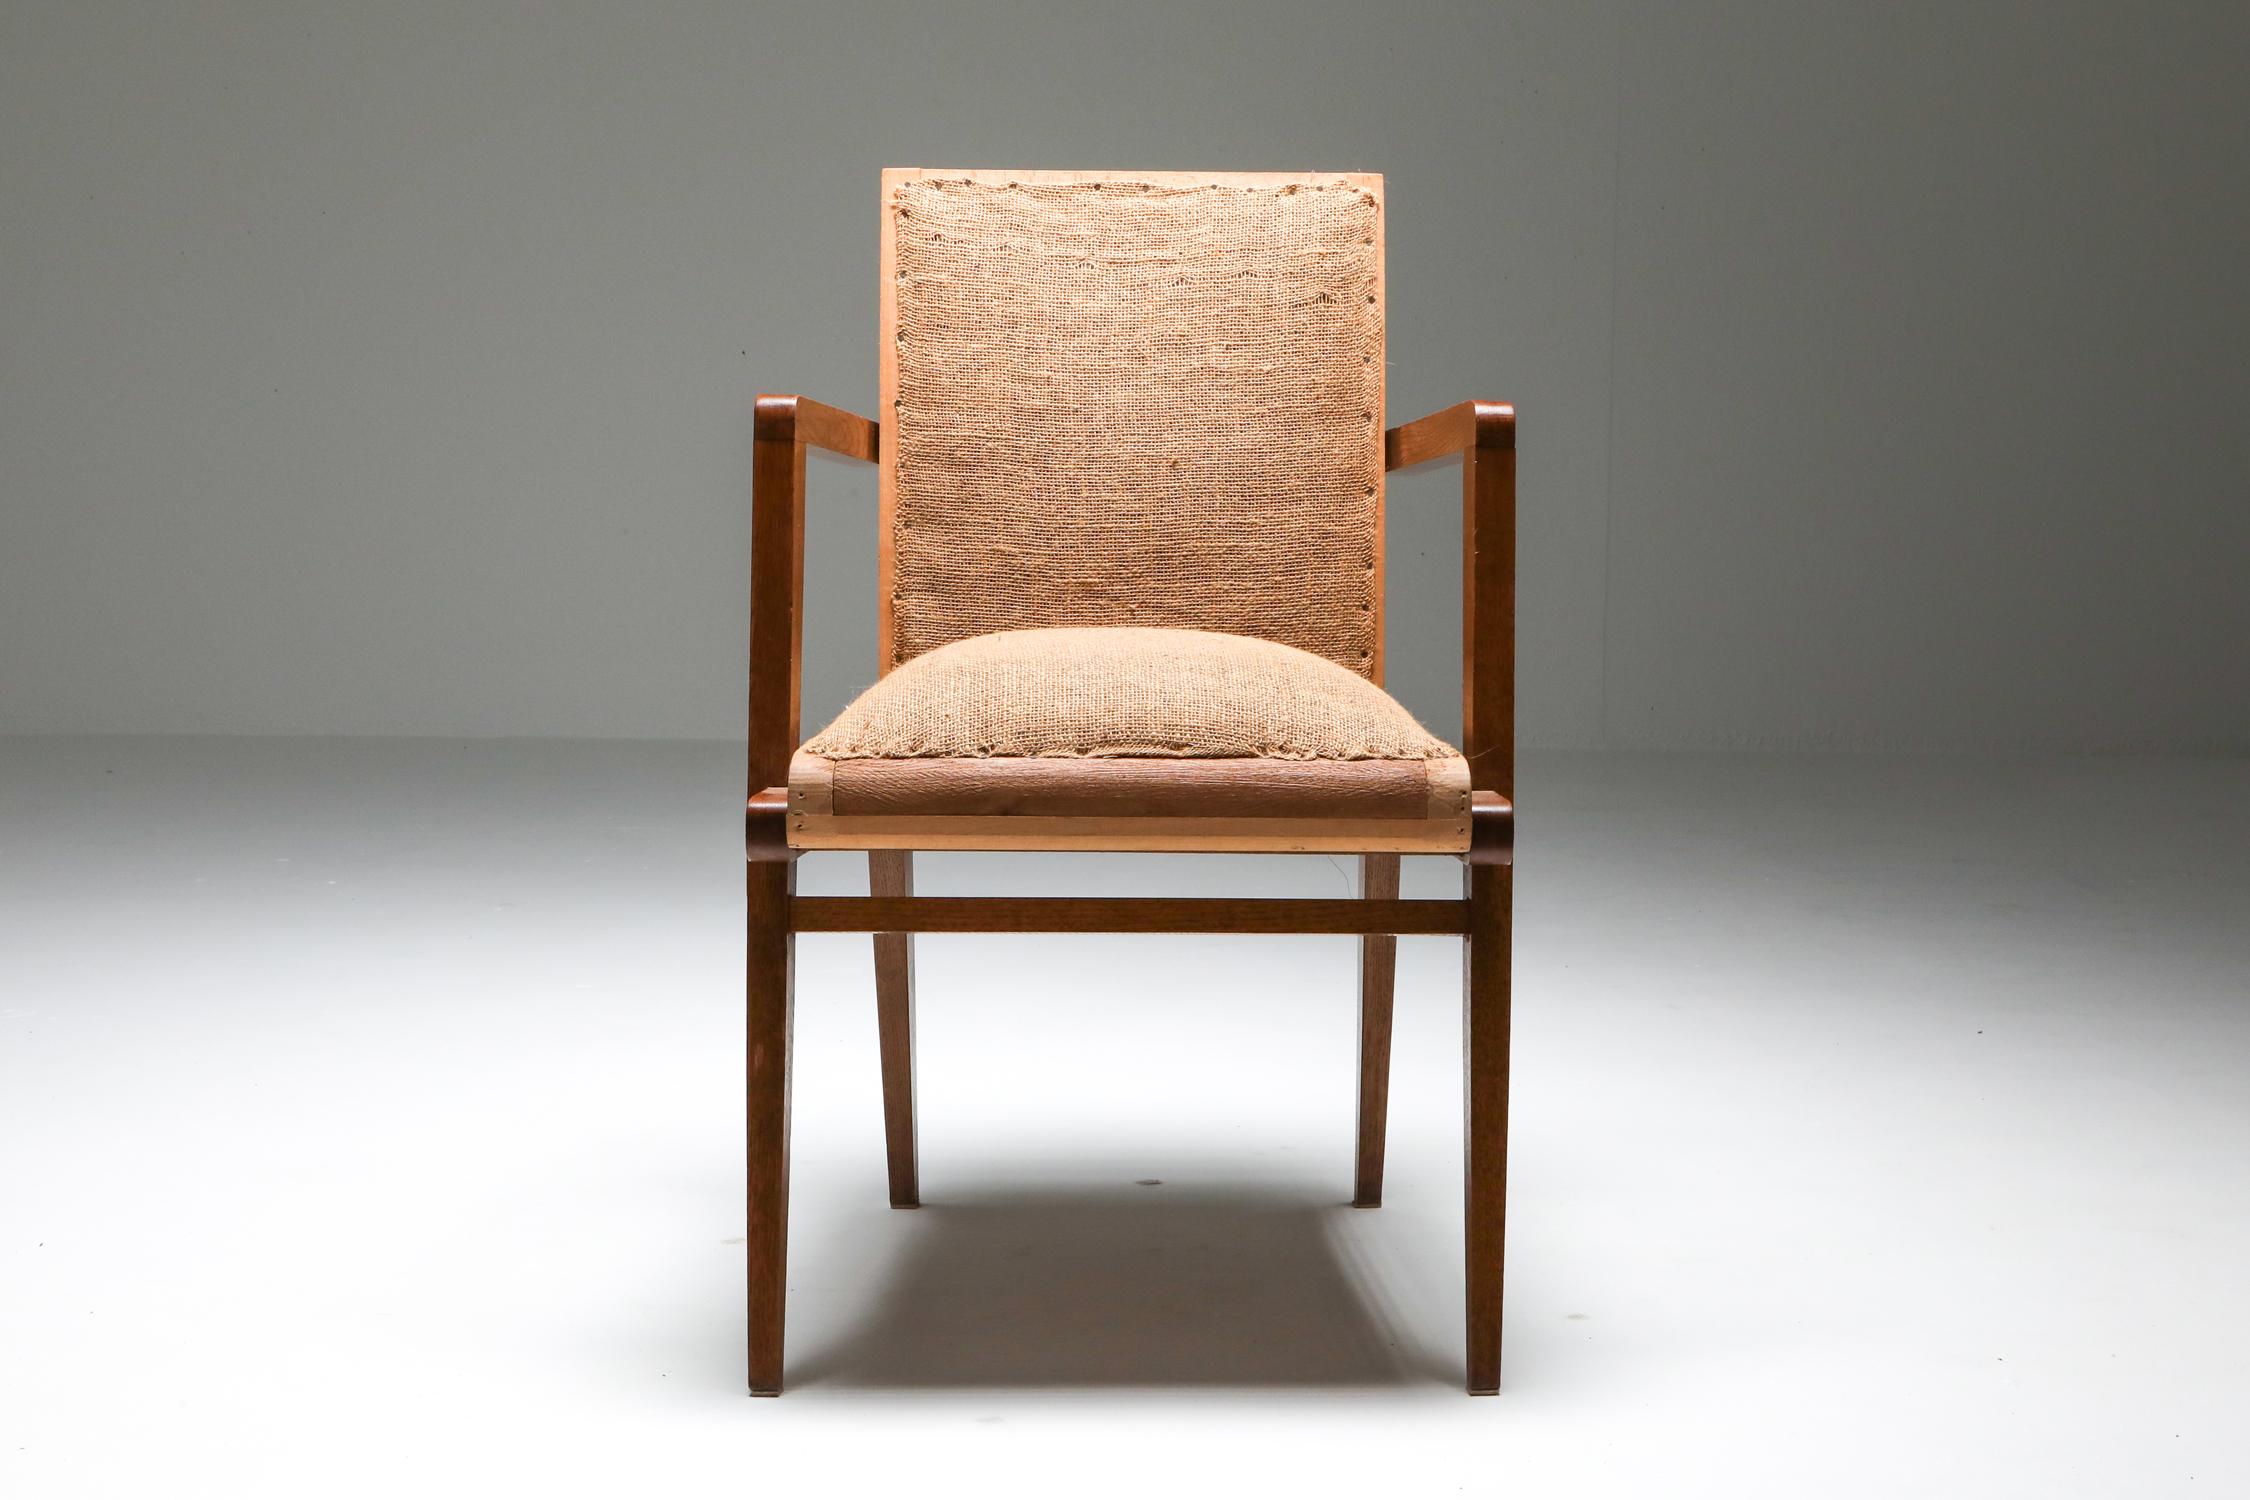 French; French Design; Mid-Century Modern; armchairs; chairs; side chairs; René Gabriel; 1950s; oak; fabric; Pierre Jeanneret; Charlotte Perriand; Wabi-Sabi;

French Mid-Century Modern armchair designed in the 1950s by René Gabriel. Solid oak side